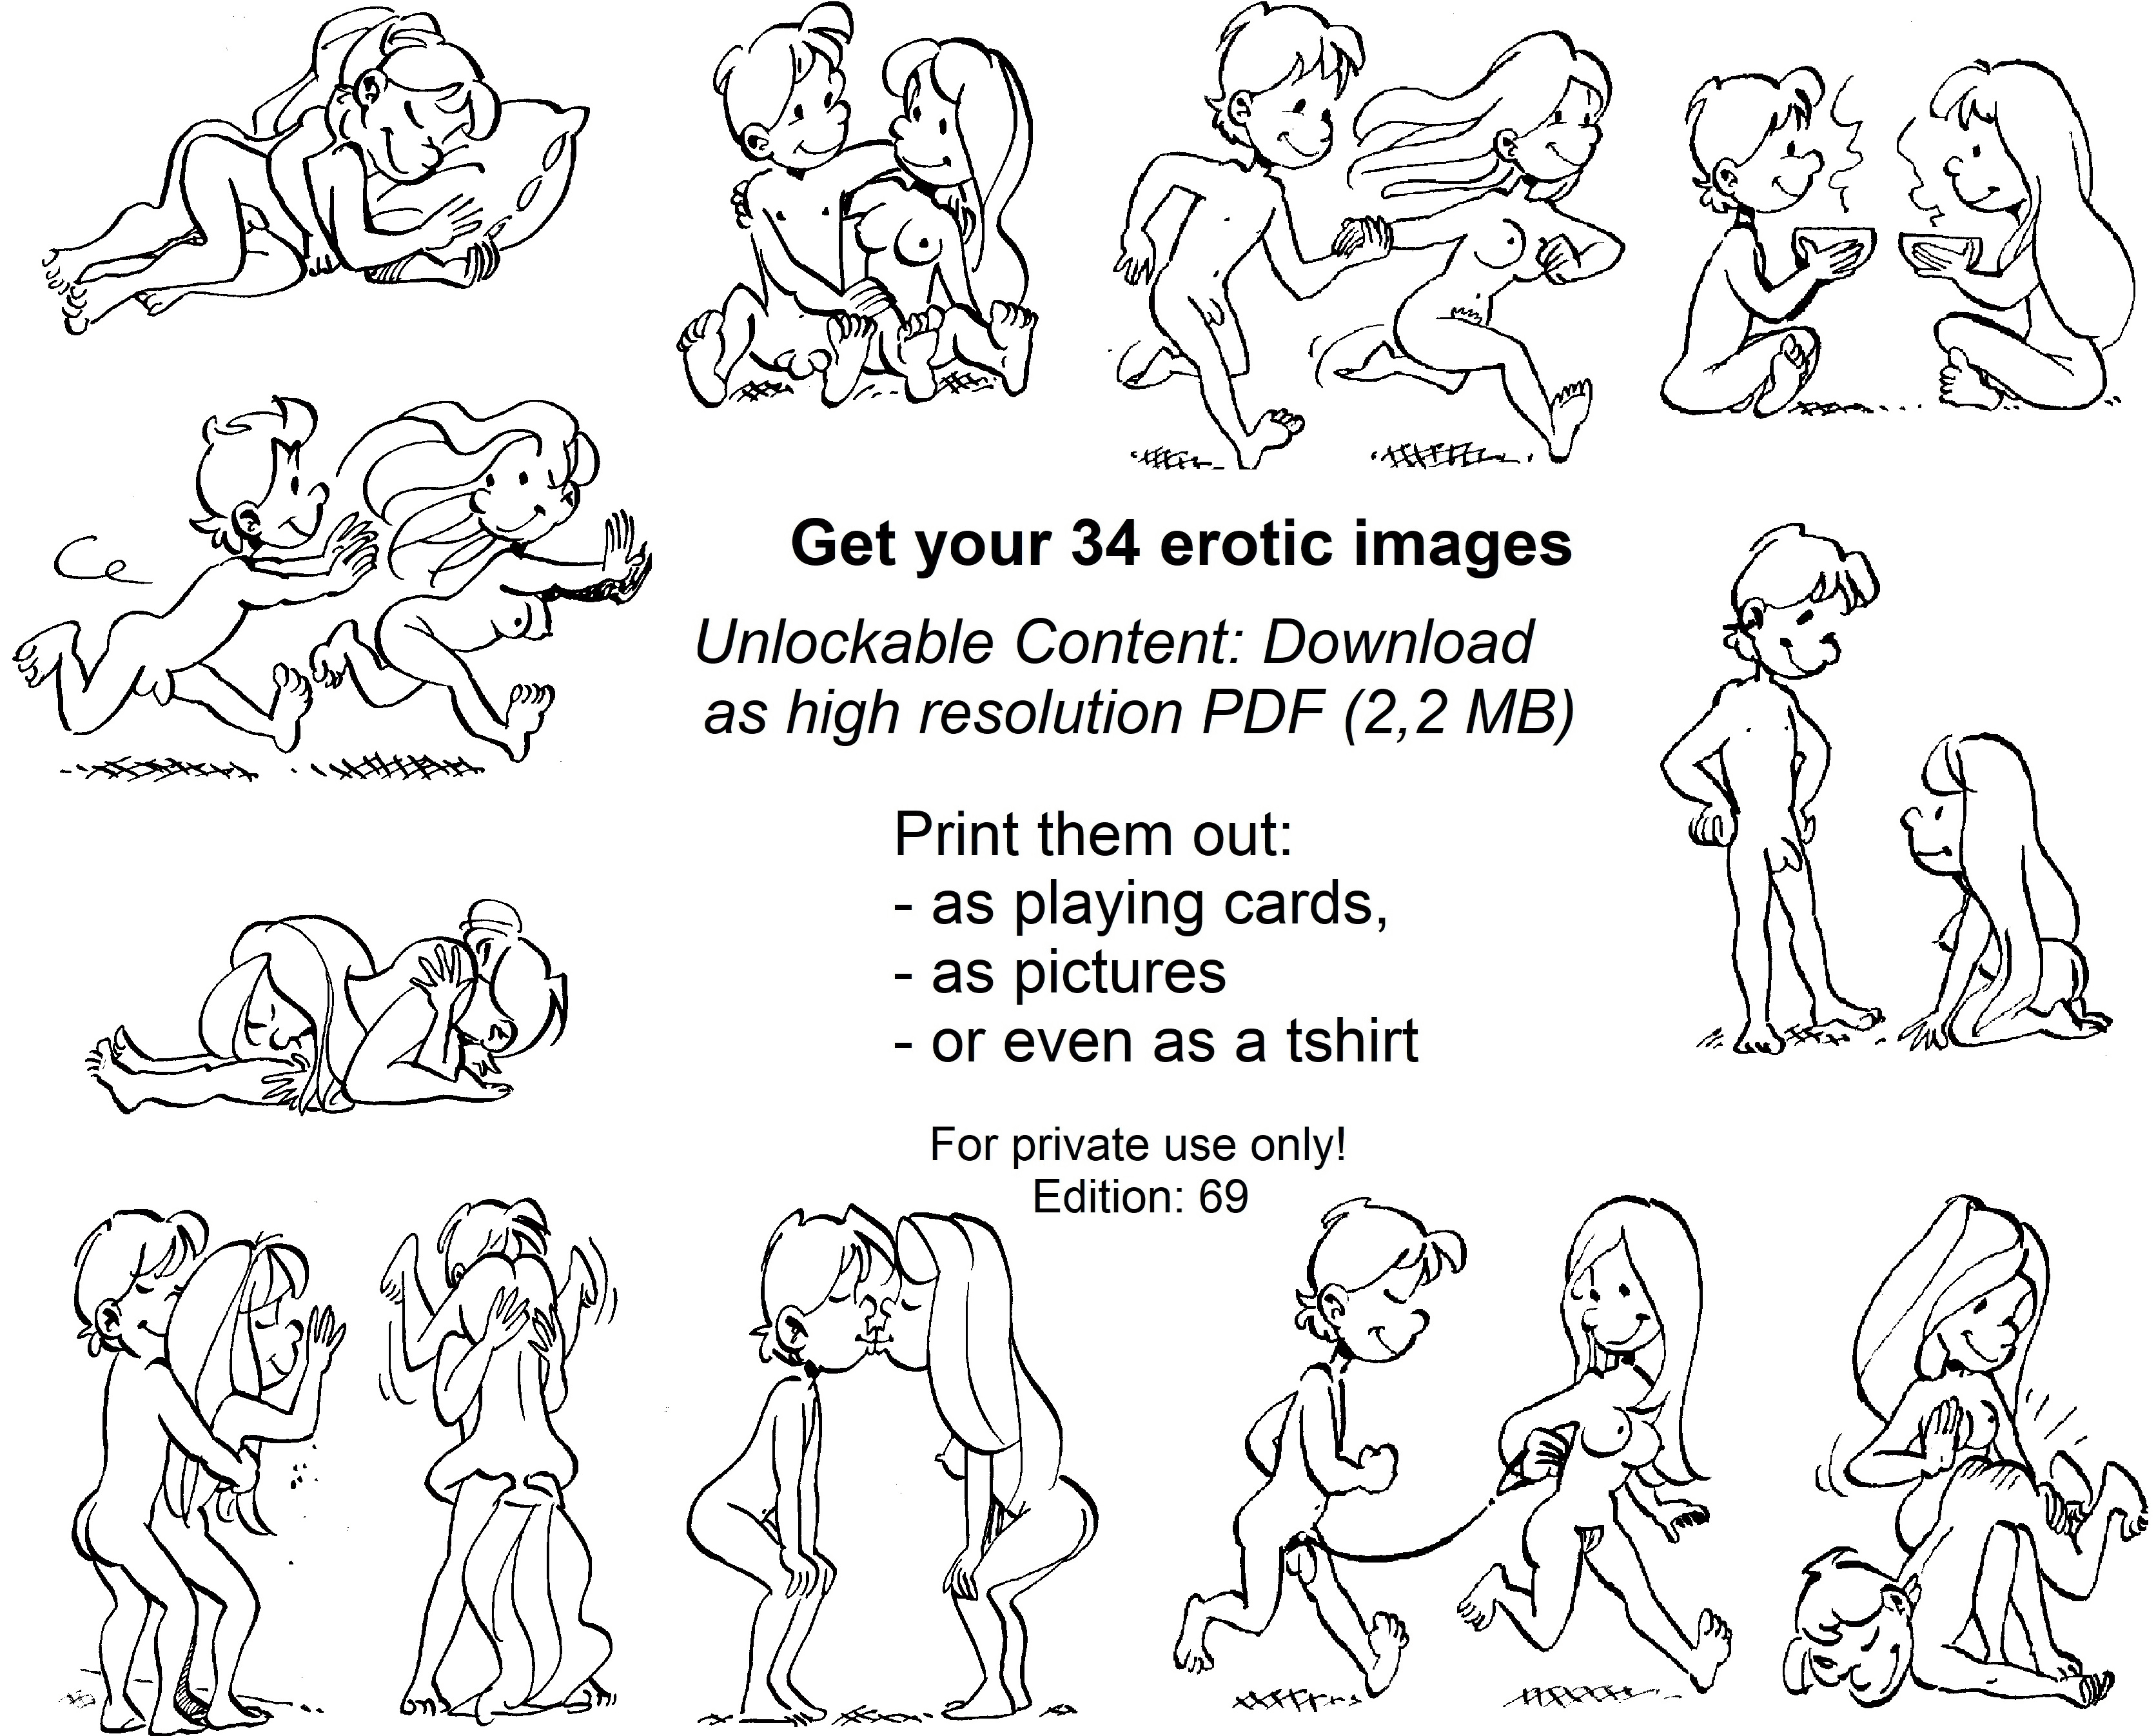 Get your 34 erotic images